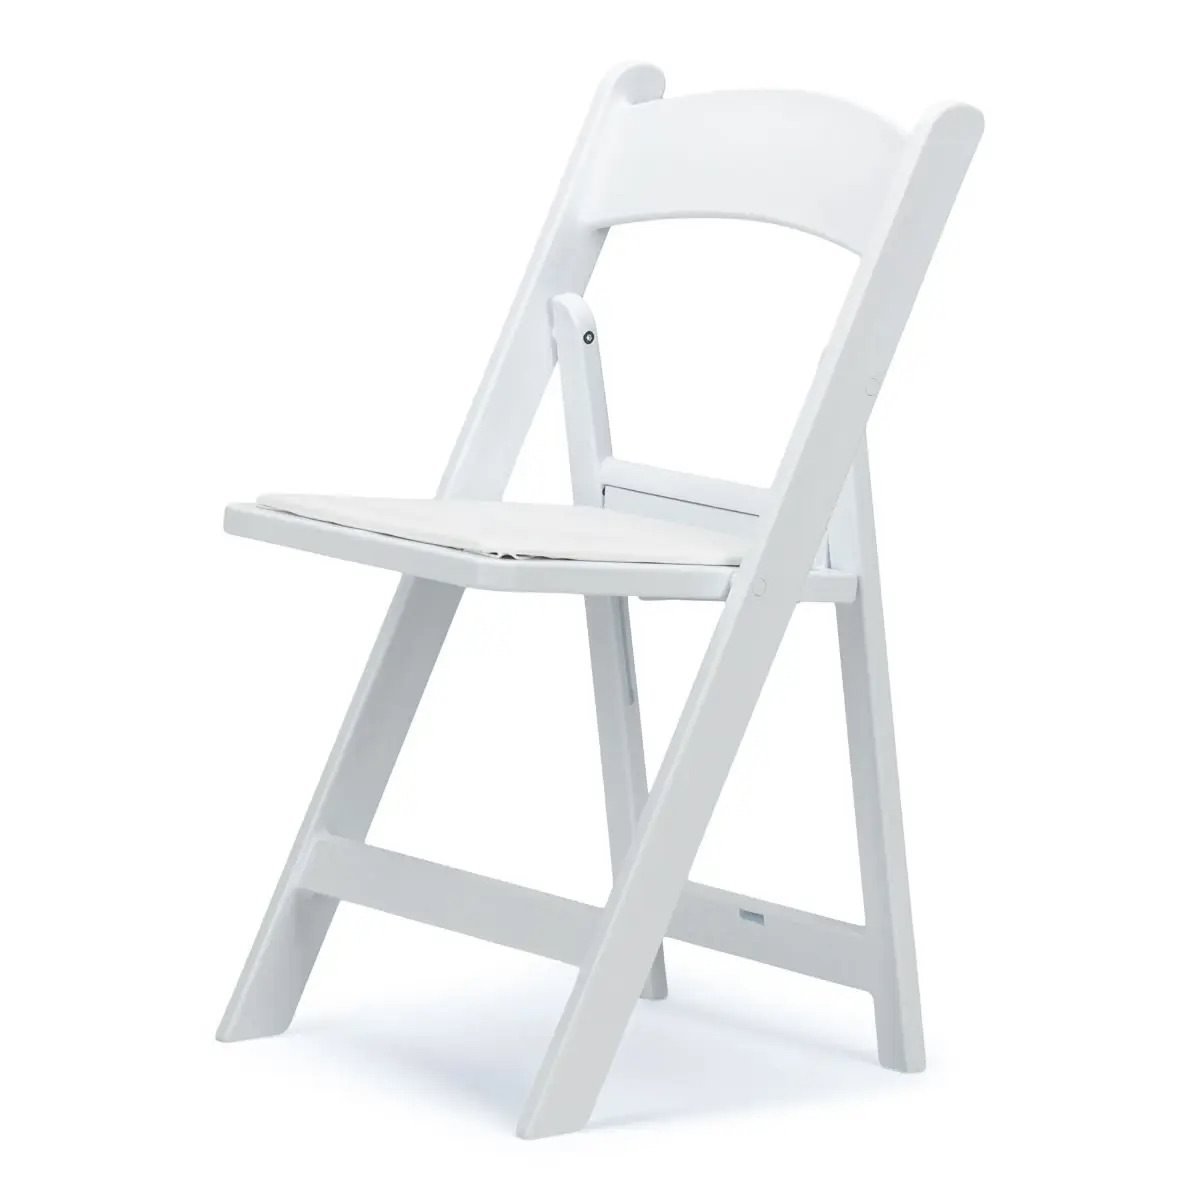 white-resin-folding-chairs-with-padded-seat-hughes-event-rentals-charleston-sc3.jpeg